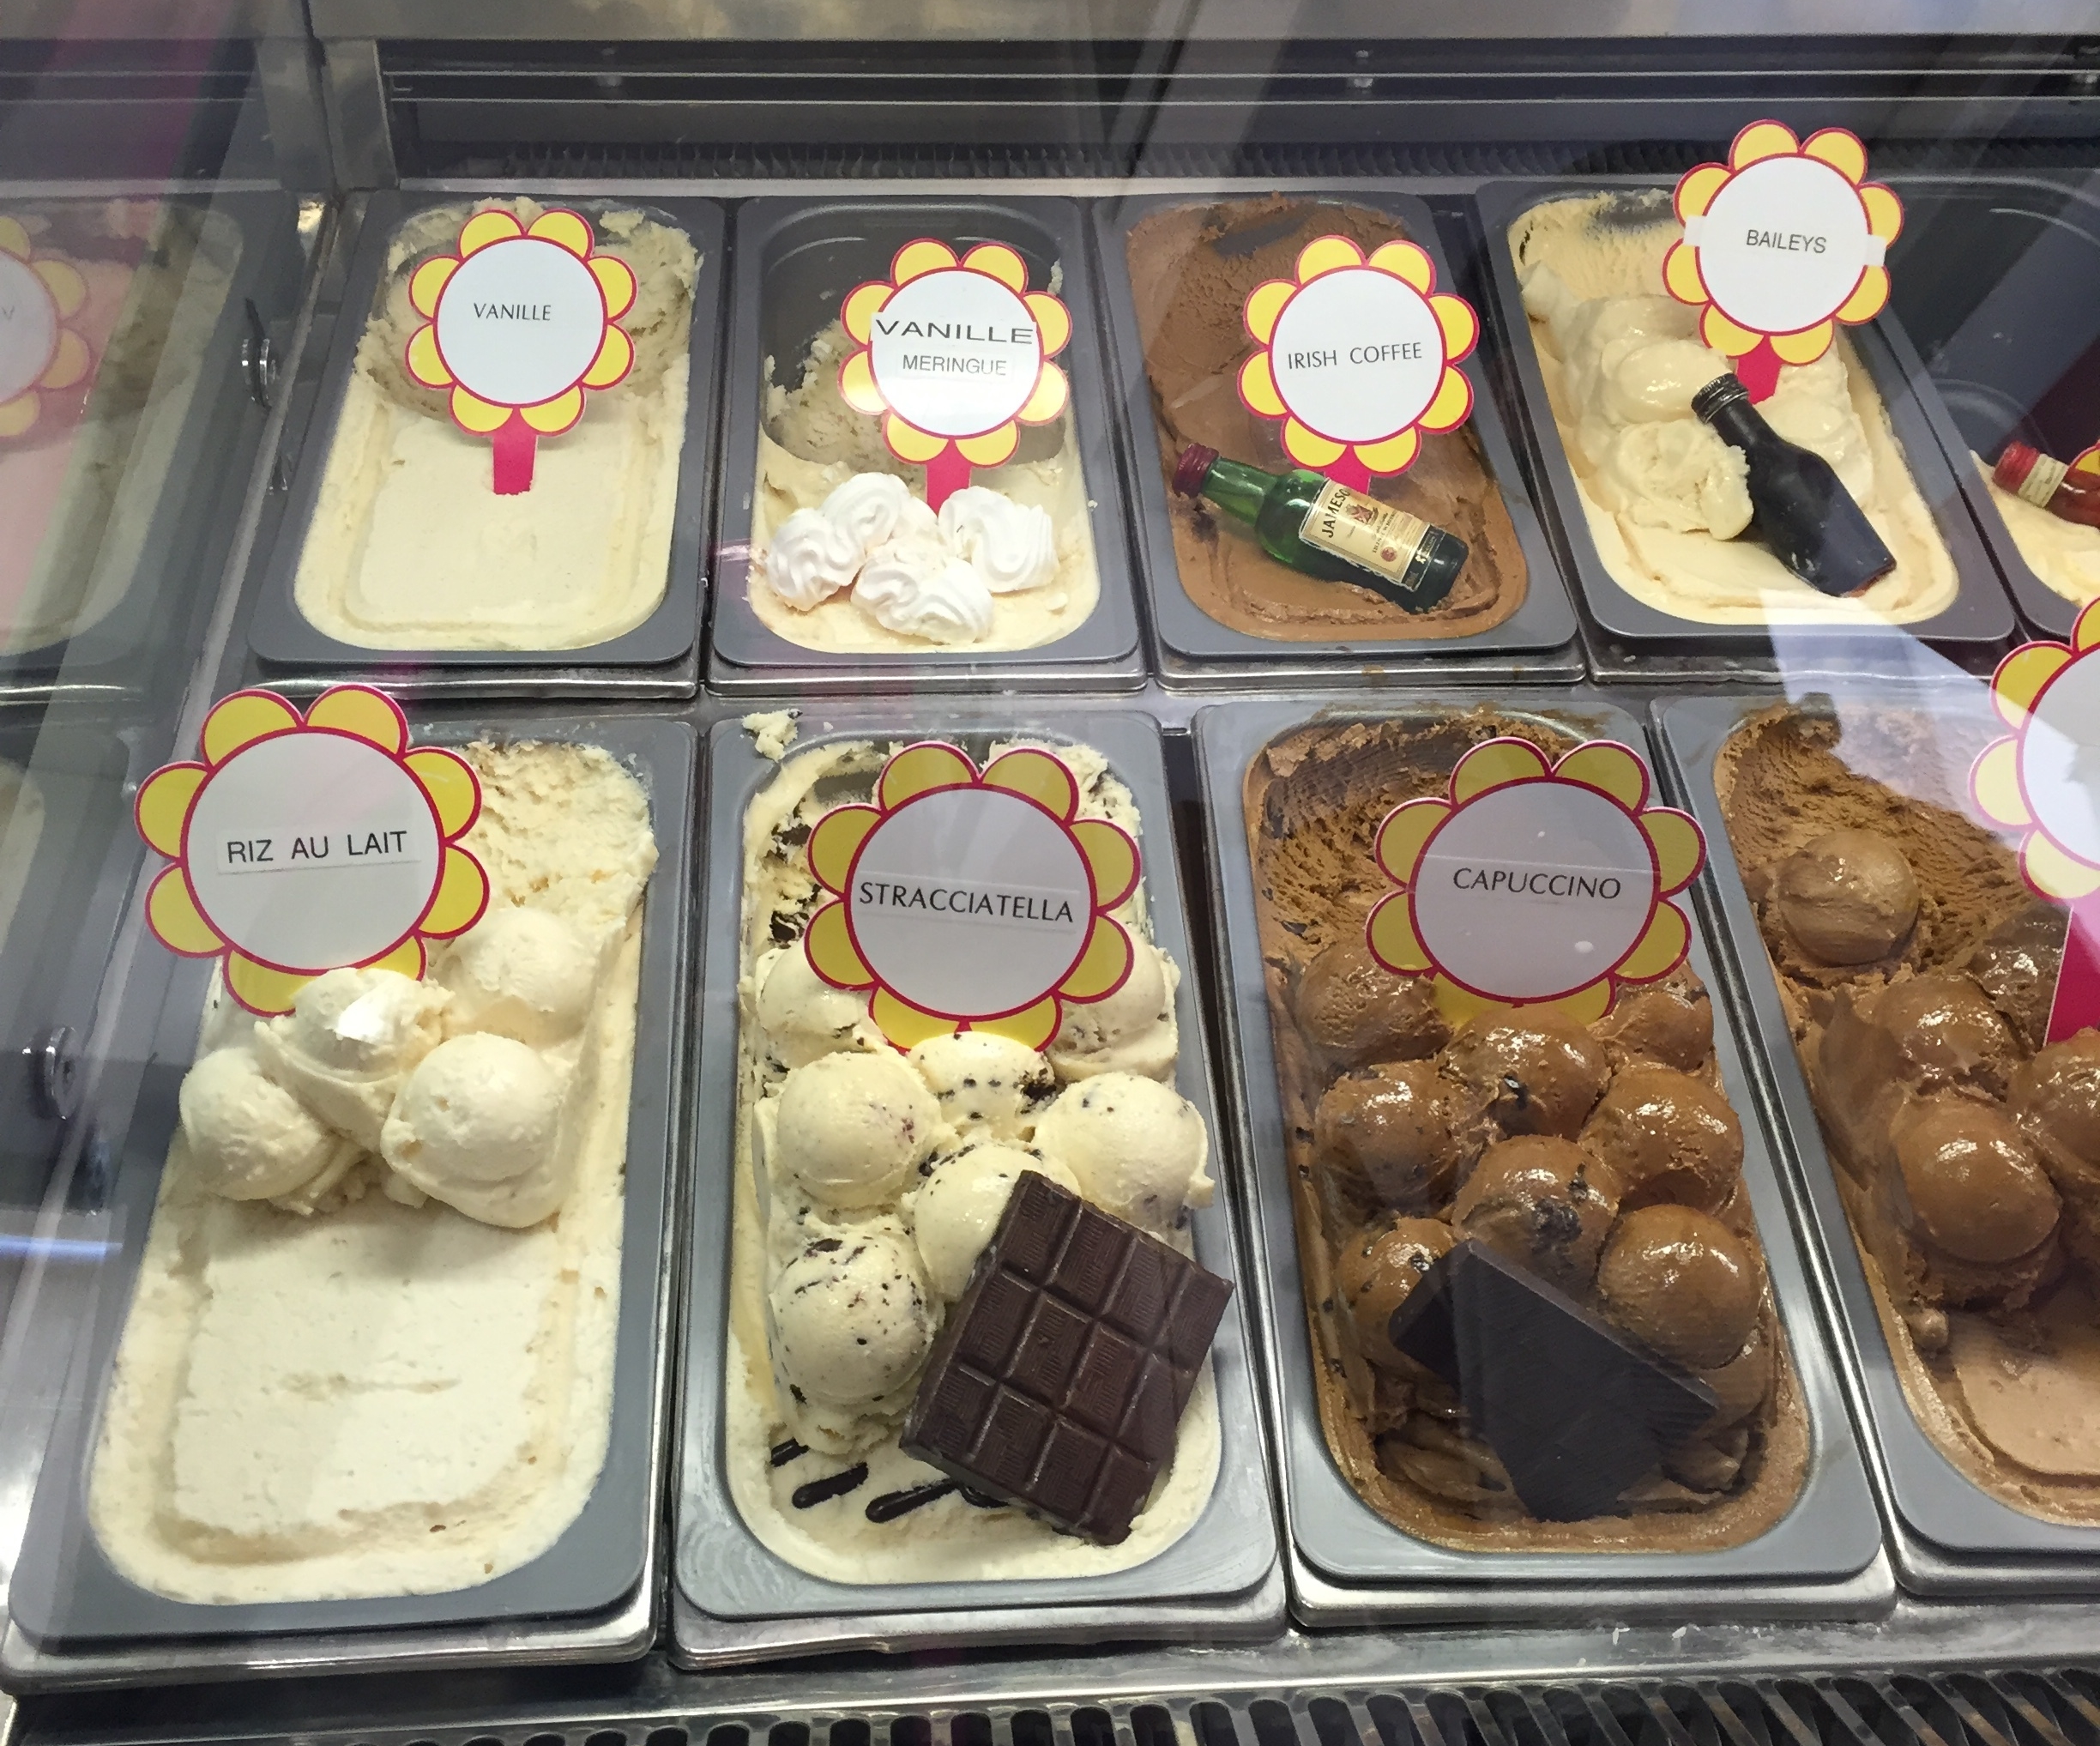 Flavours of ice cream in Nice - Nice travel blog